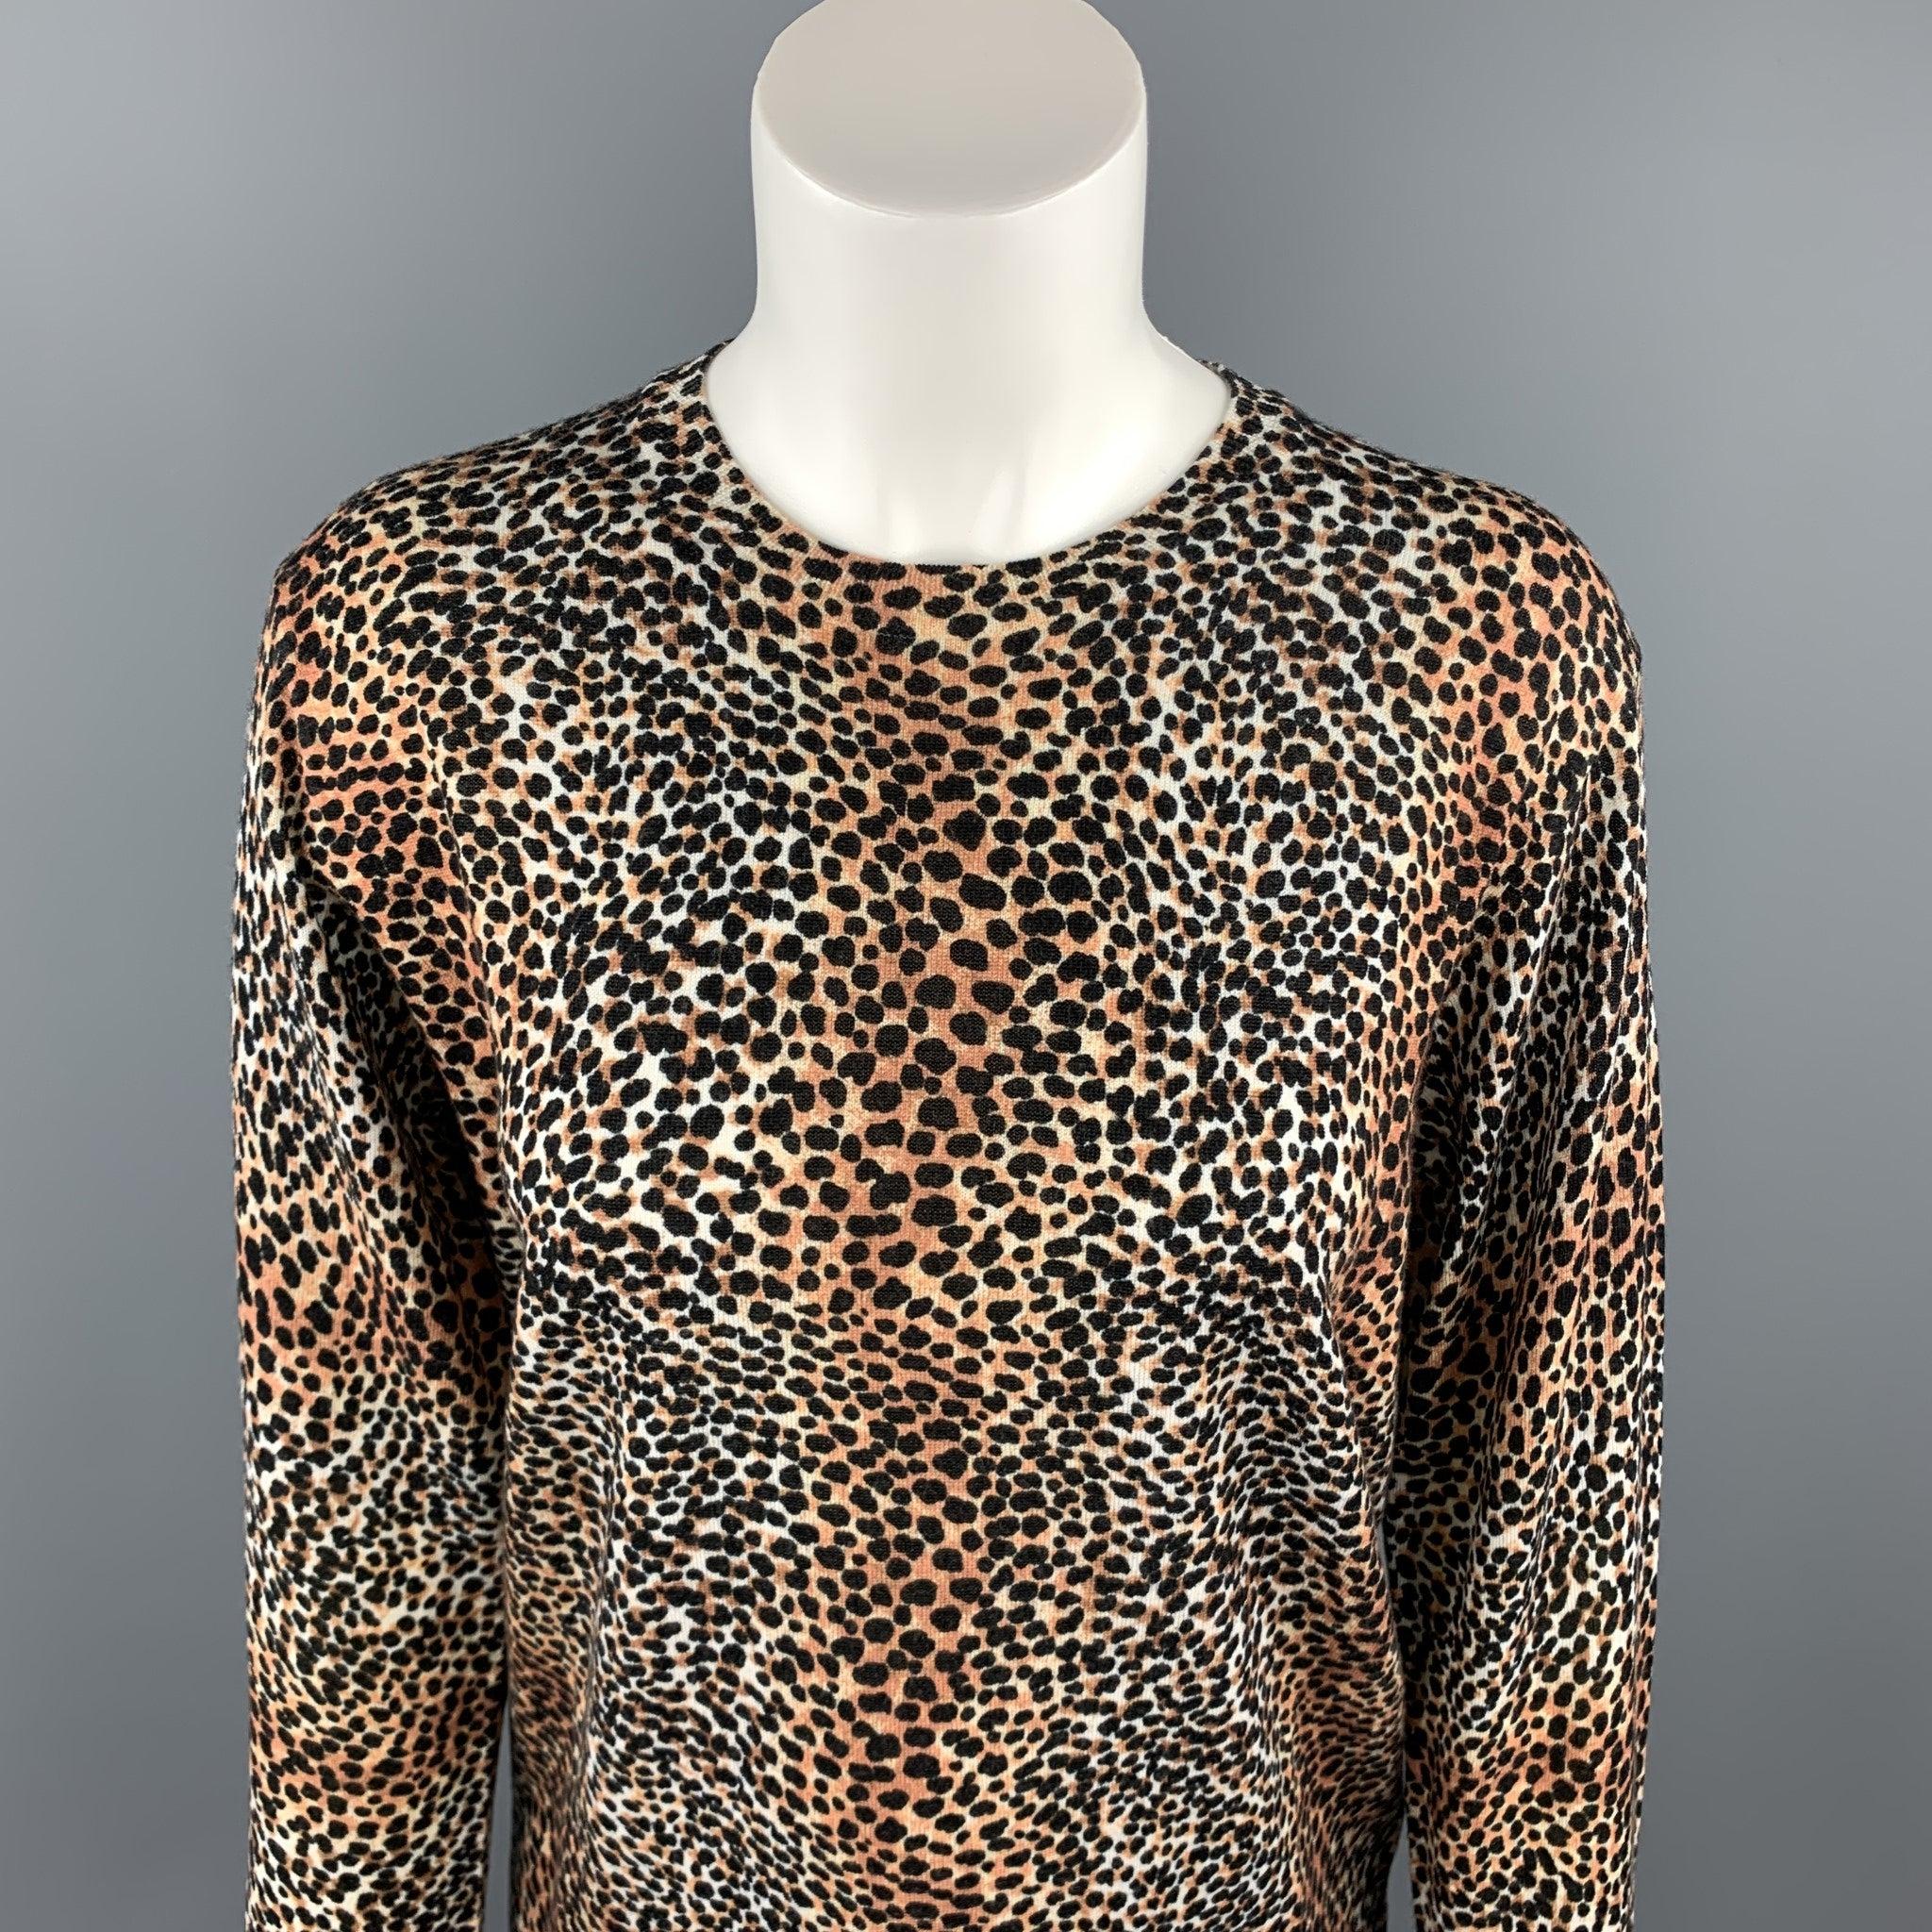 EQUIPMENT FEMME pullover comes in a black & tan cheetah print wool featuring a crew-neck.
New With Tags. 

Marked:   XS/TP
 

Measurements: 
 
Shoulder: 17 inches 
Bust: 38 inches 
Sleeve: 24 inches 
Length: 24.5 inches 
  
  
 
Reference: